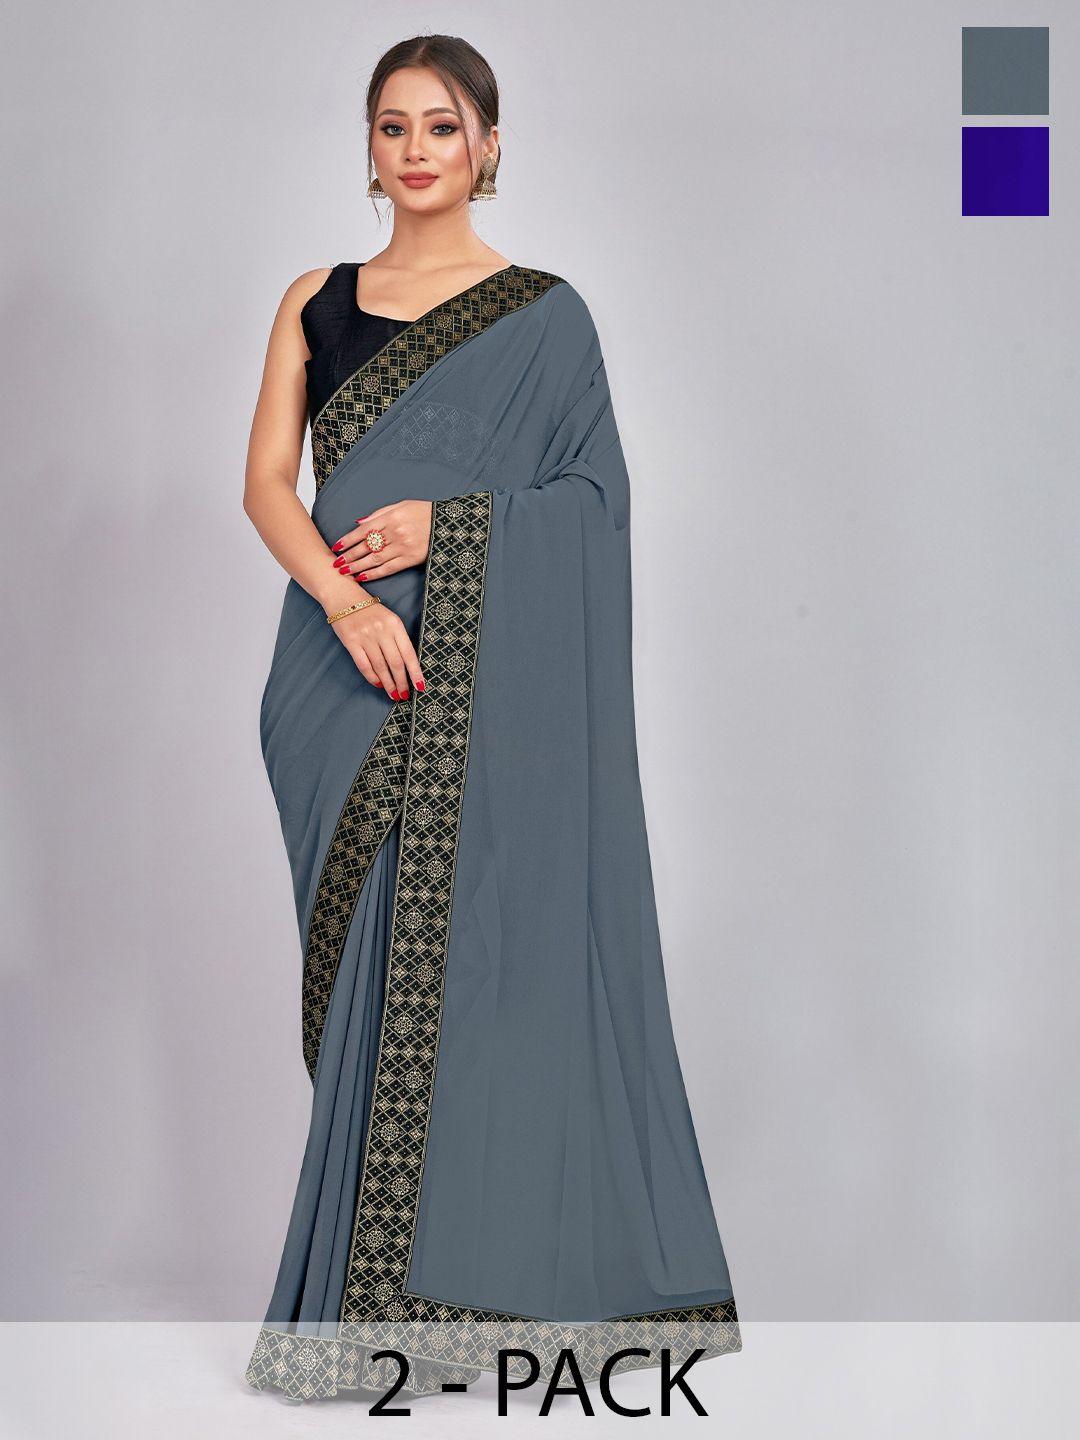 castillofab selection of 2 woven design georgette saree with lace border